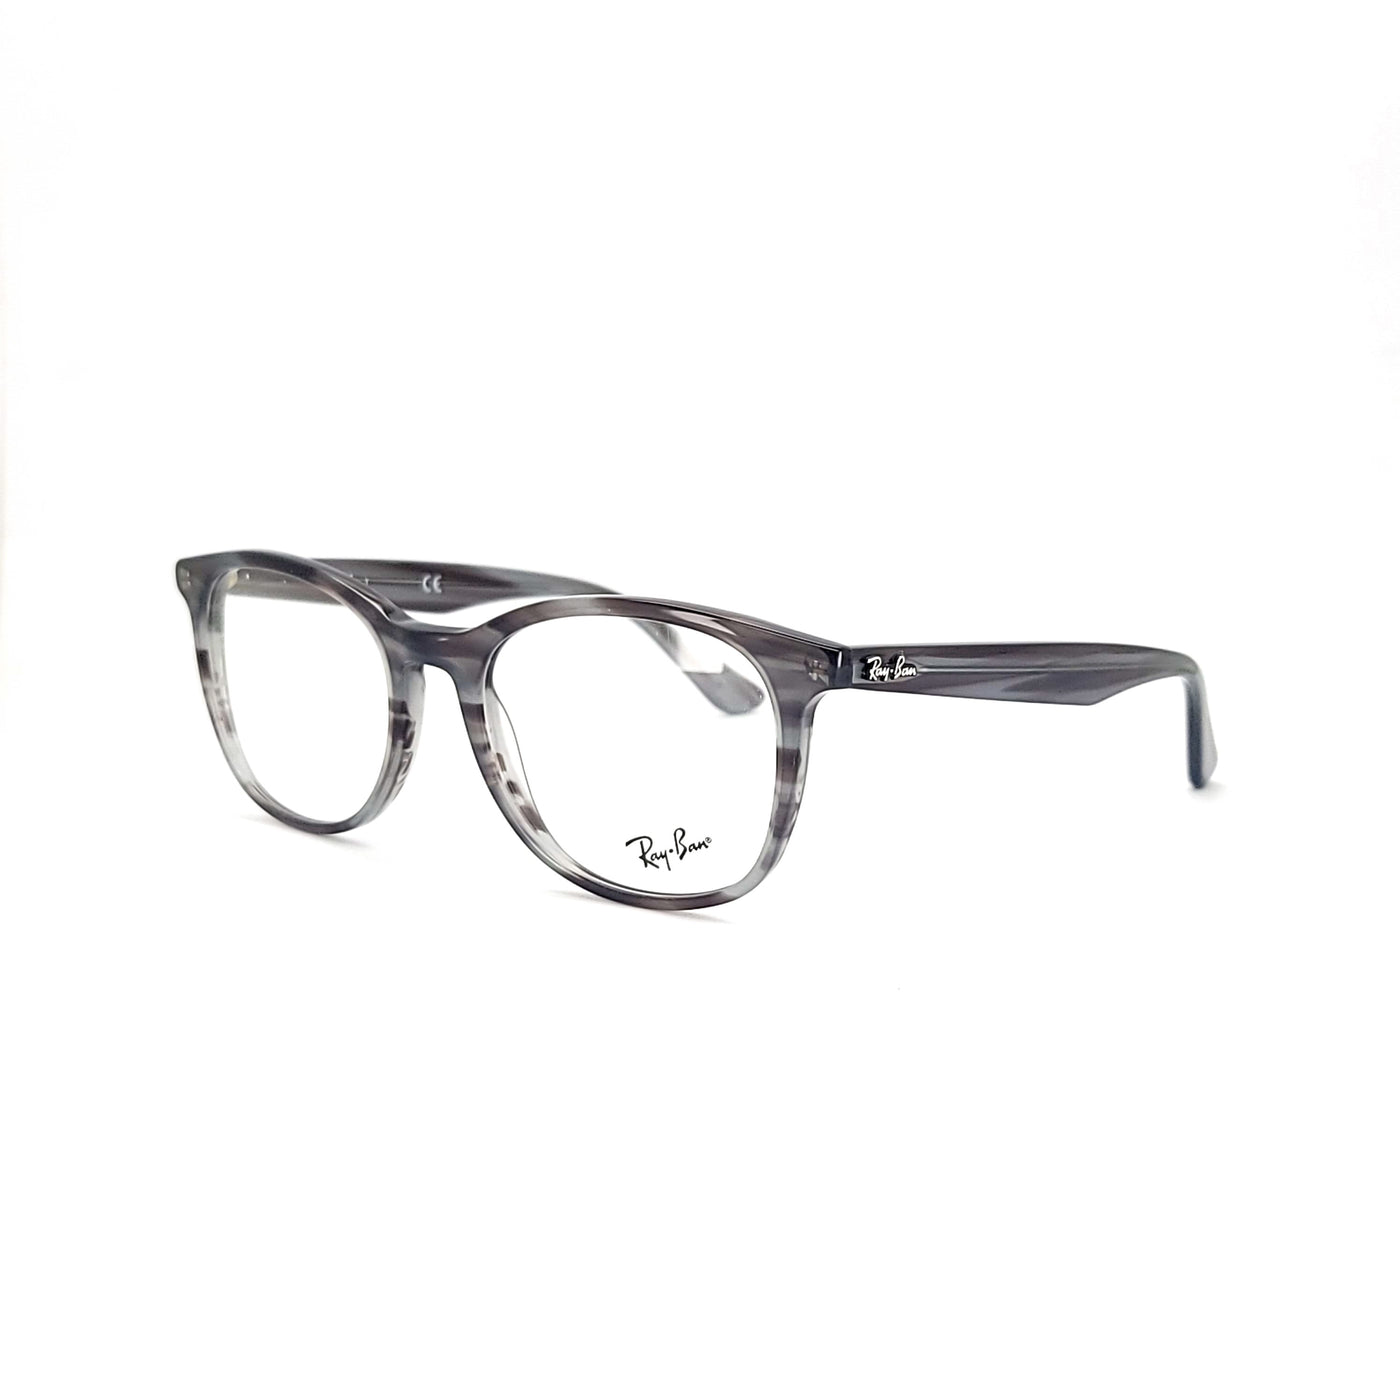 Ray-Ban Highstreet RB5356/8055_54 | Eyeglasses - Vision Express Optical Philippines